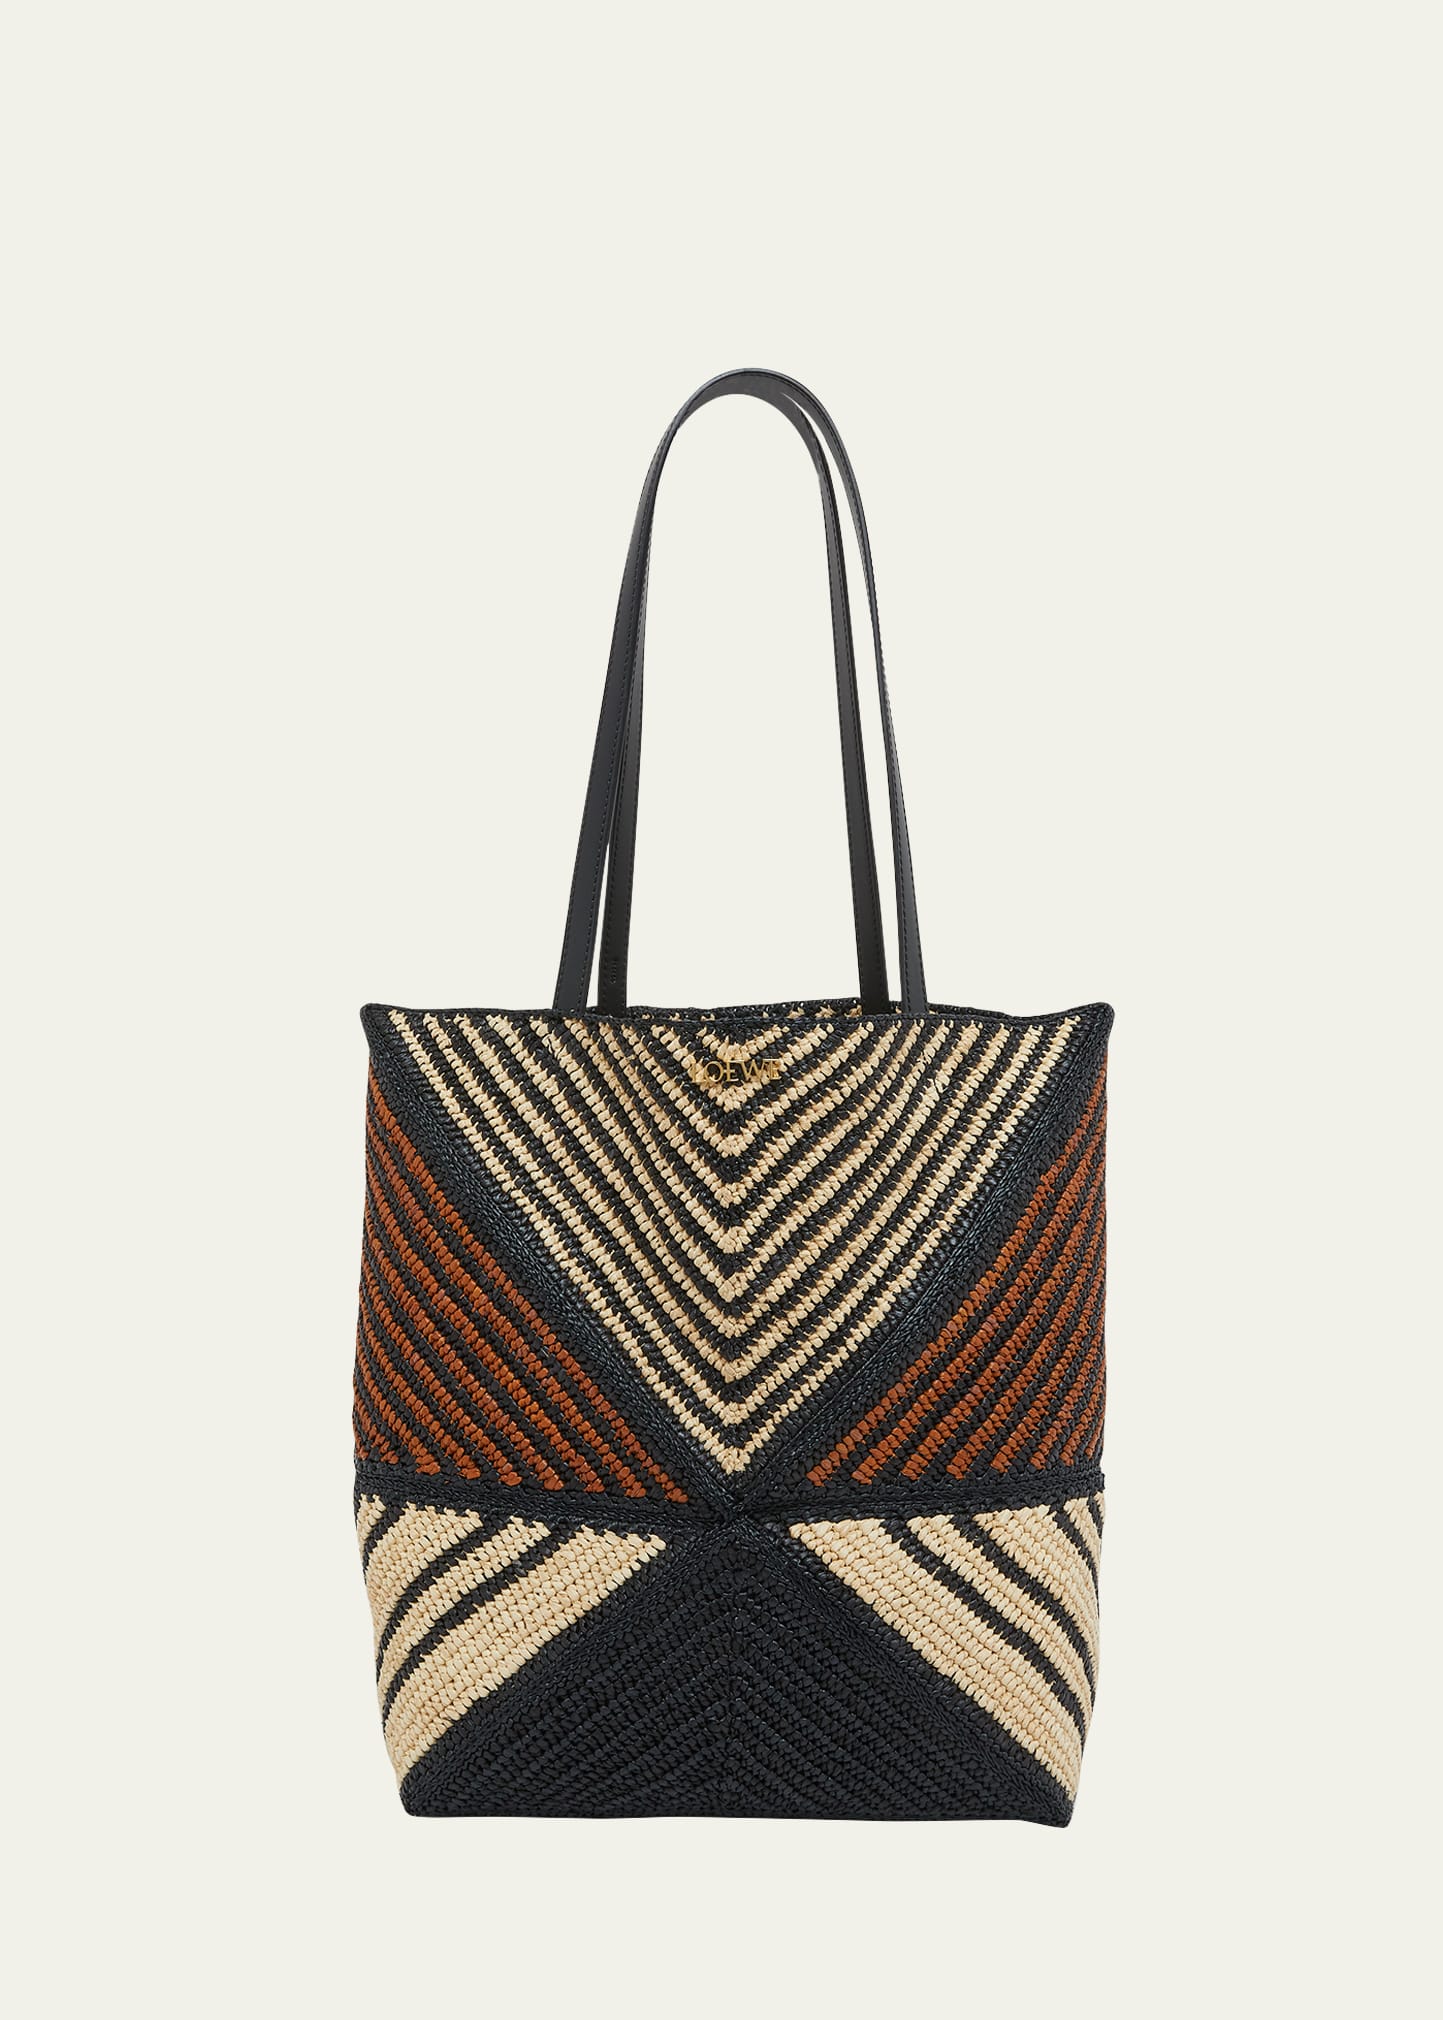 Loewe X Paula's Ibiza Medium Puzzle Fold Tote Bag In Striped Raffia With Leather Handles In Neutral